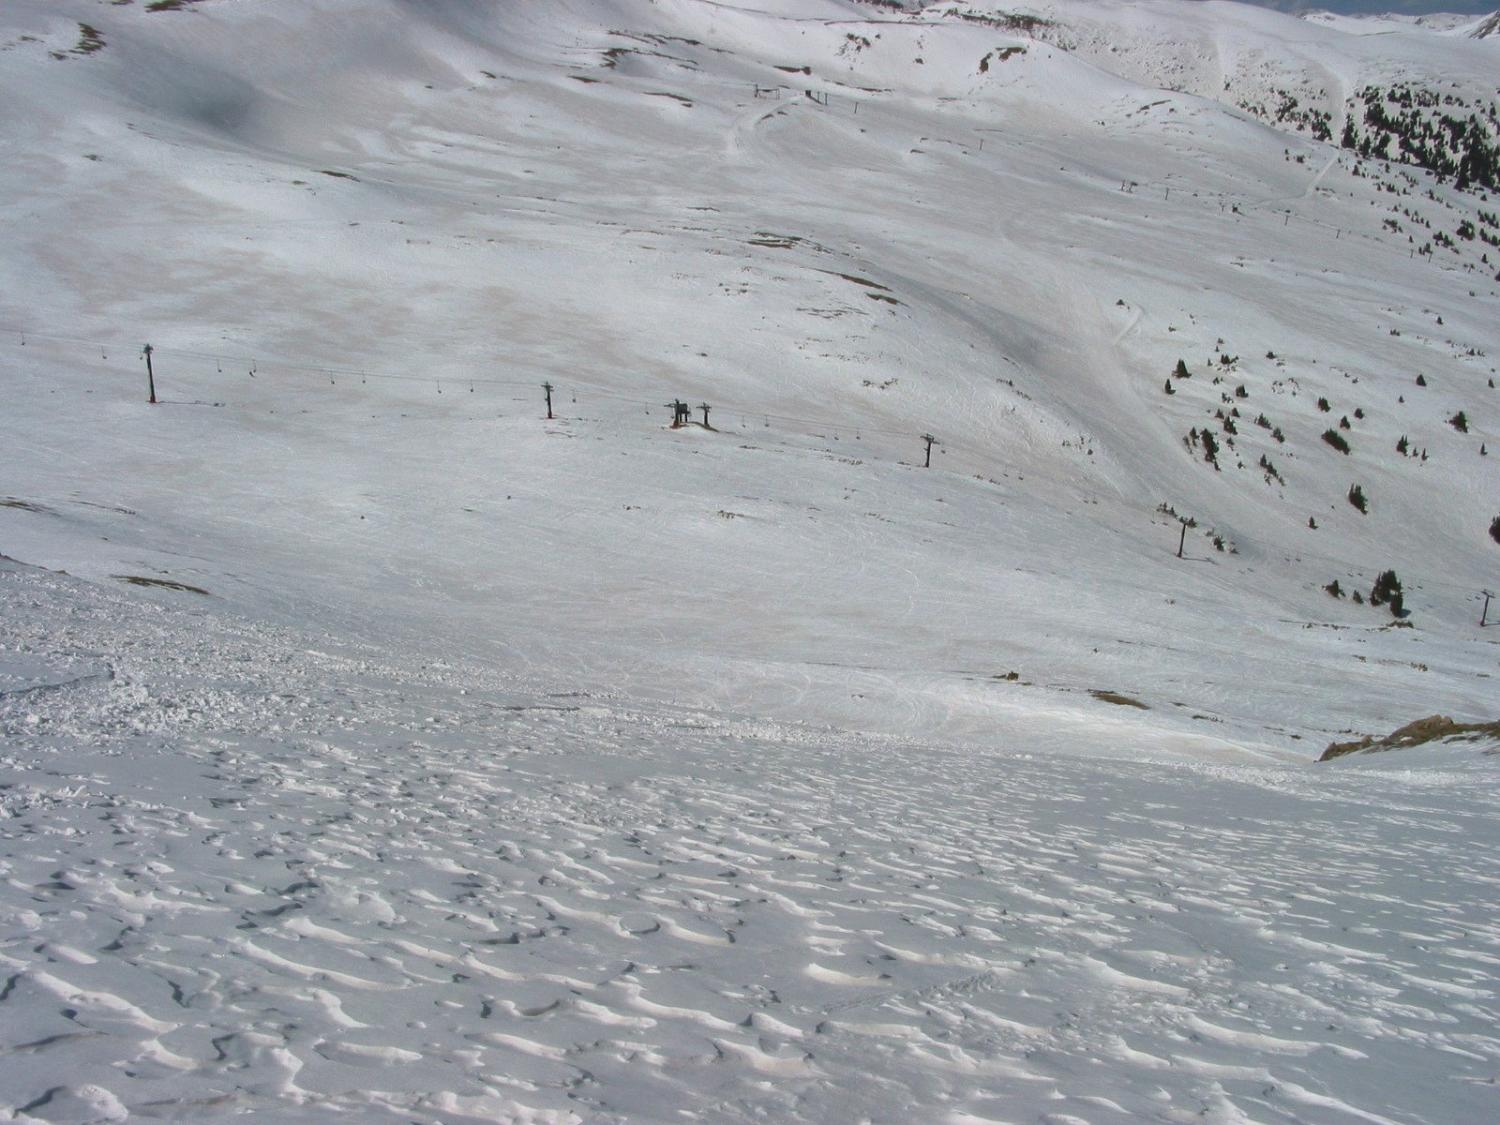 Looking down across the sastrugi of the Castle Rock Run at Chairlift 9 and the Four Headwall Area of Loveland.